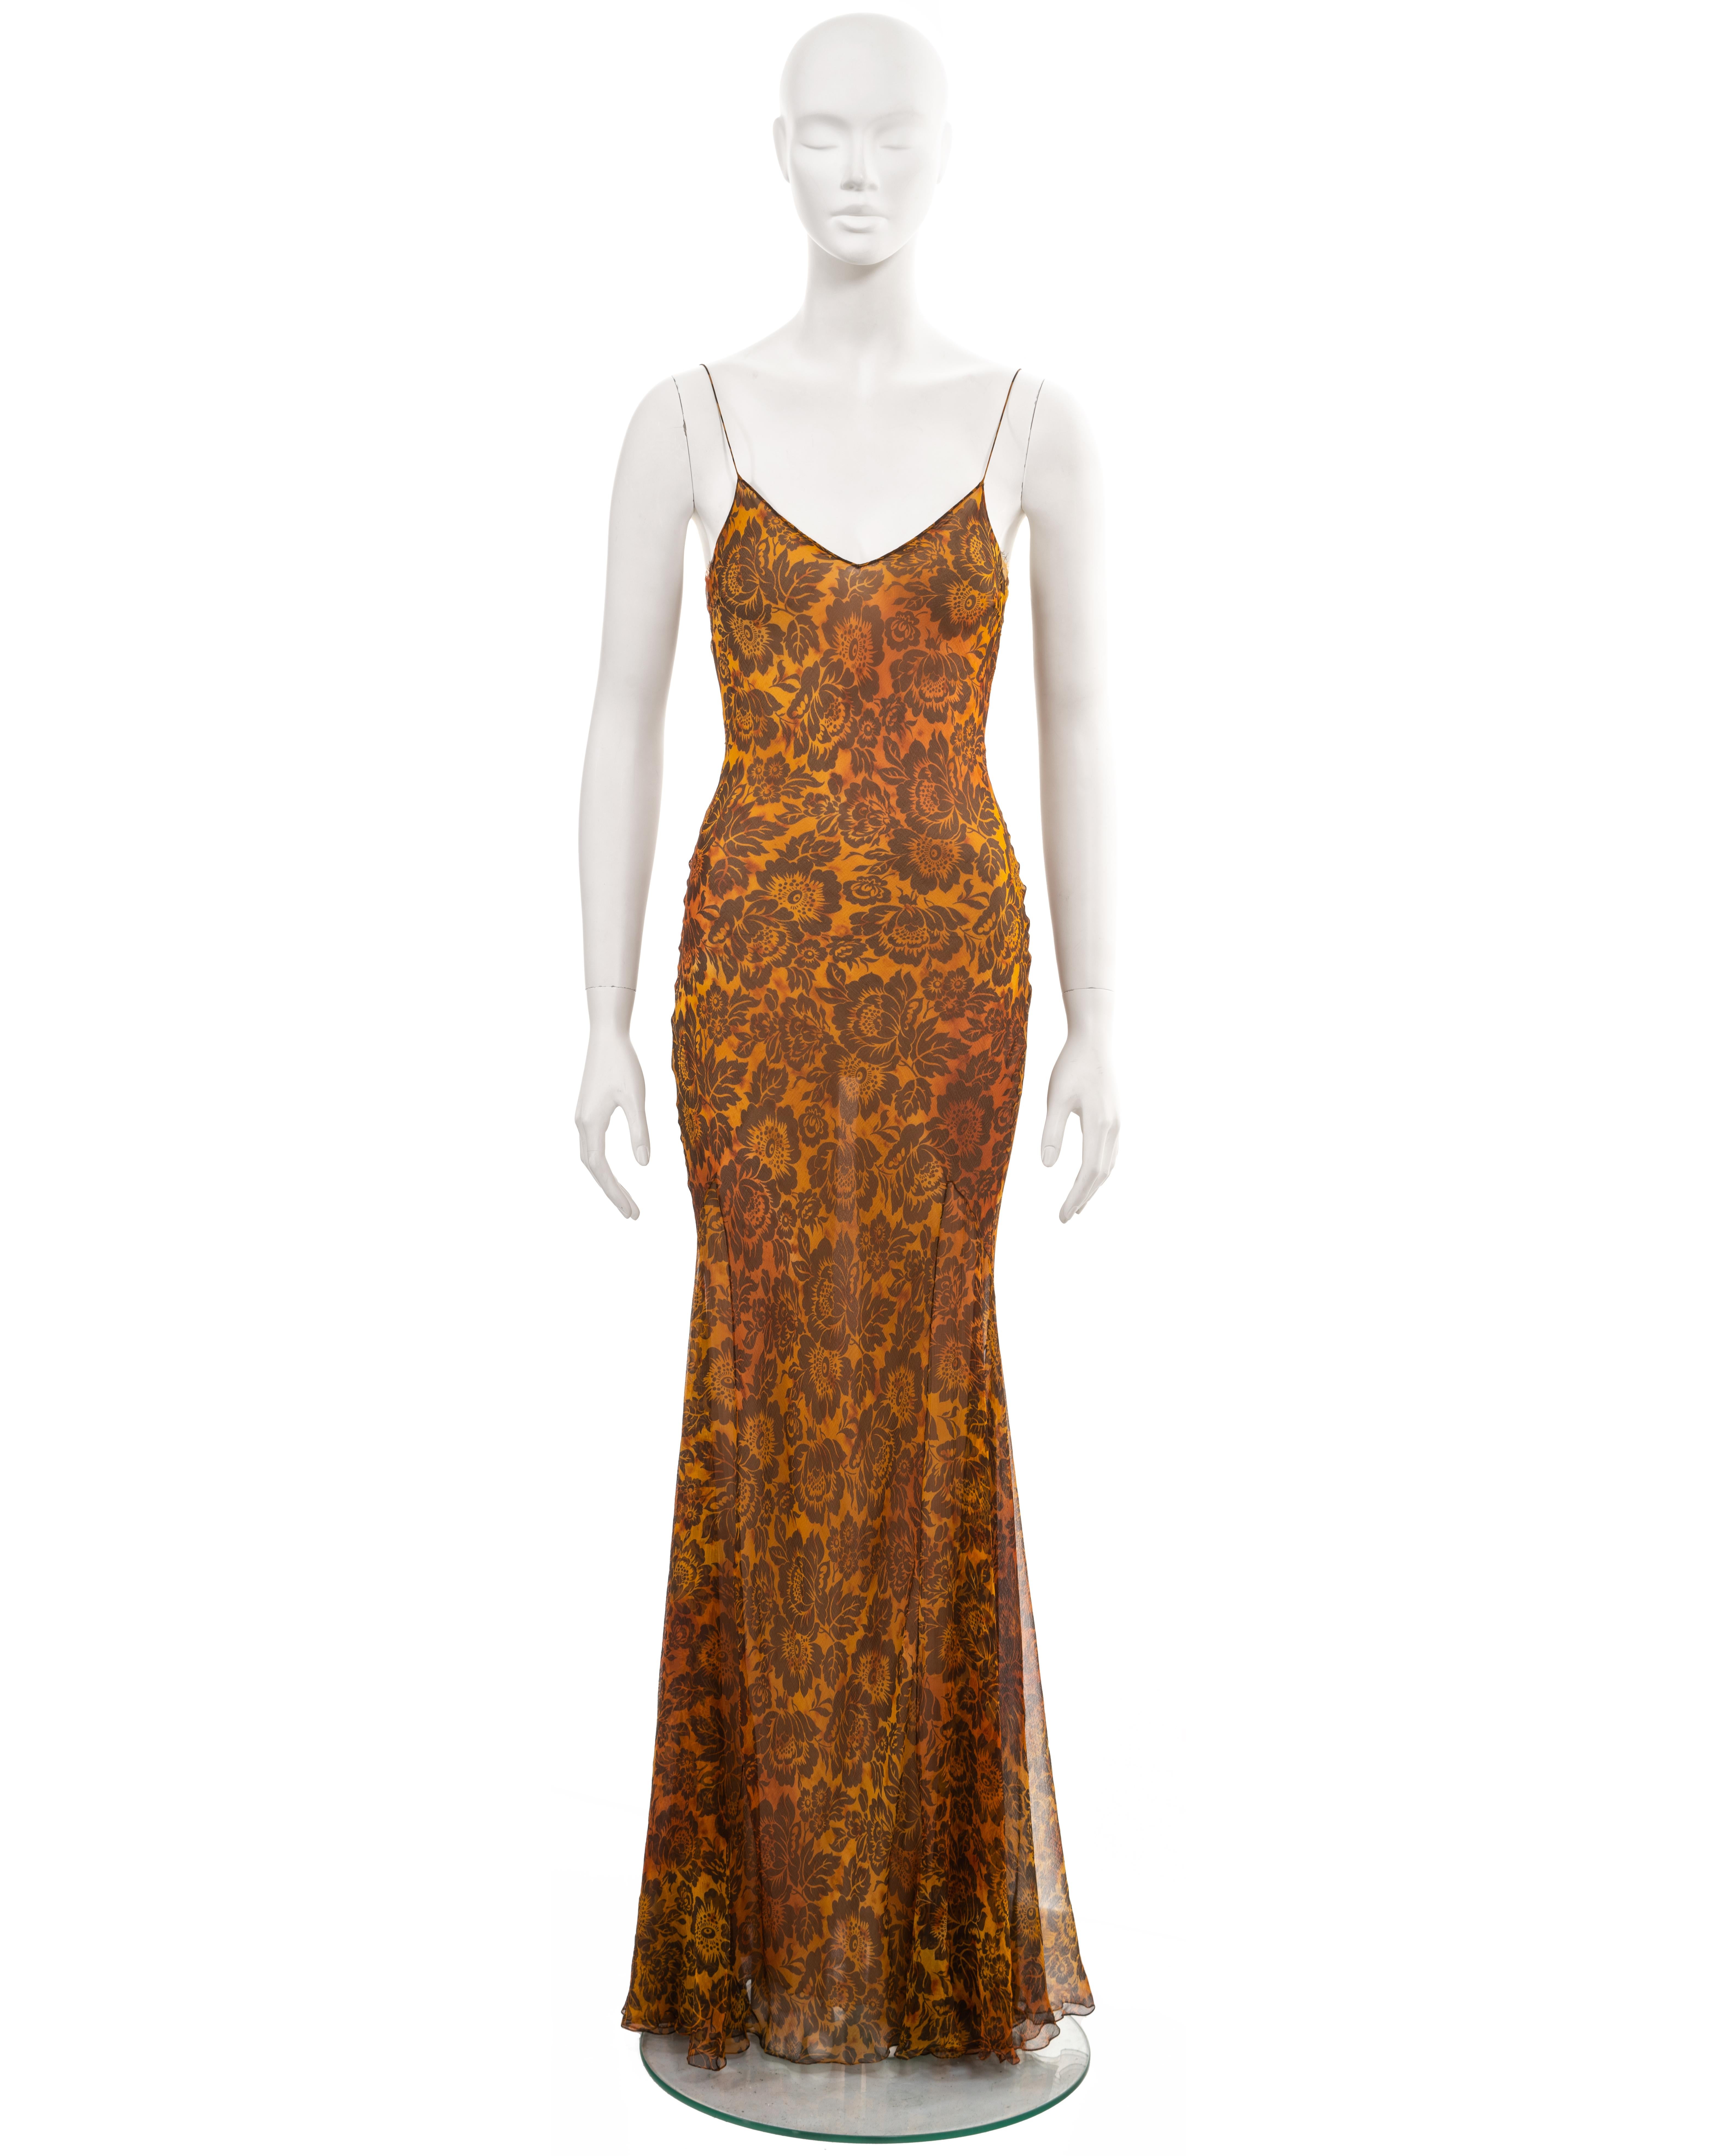 ▪ John Galliano archive evening dress
▪ Spring-Summer 1999
▪ Tea-stained bias-cut silk with allover floral motif in burnt orange and brown 
▪ Nude lining 
▪ V-neck 
▪ Spaghetti straps 
▪ Floor-length skirt 
▪ 100% Silk
▪ FR40 - UK12 - US6 
▪ Made in